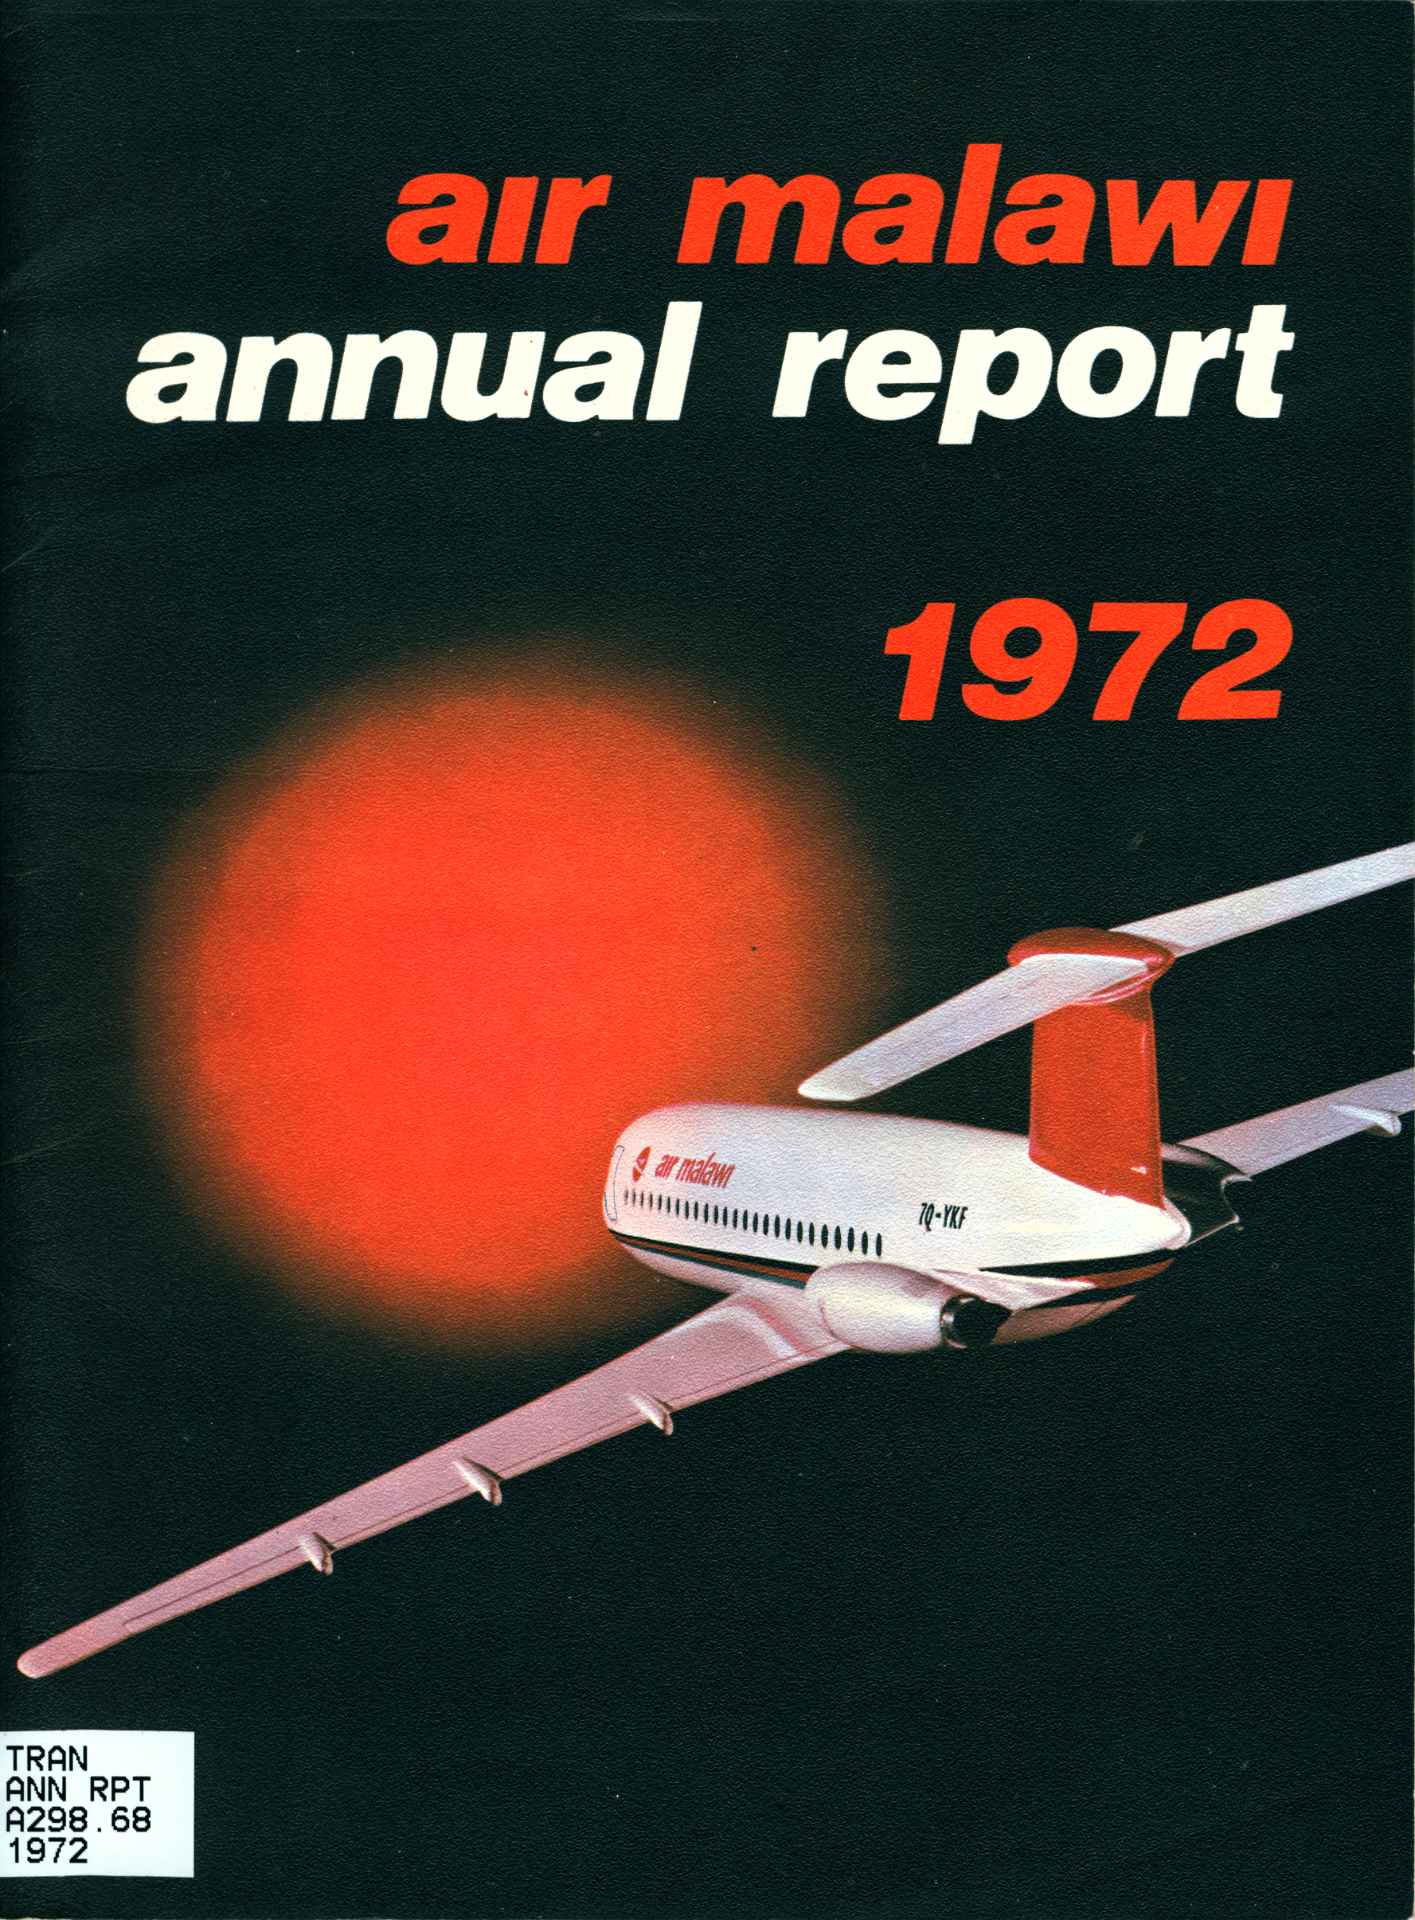 Front cover with plane flying toward red circle in the distance